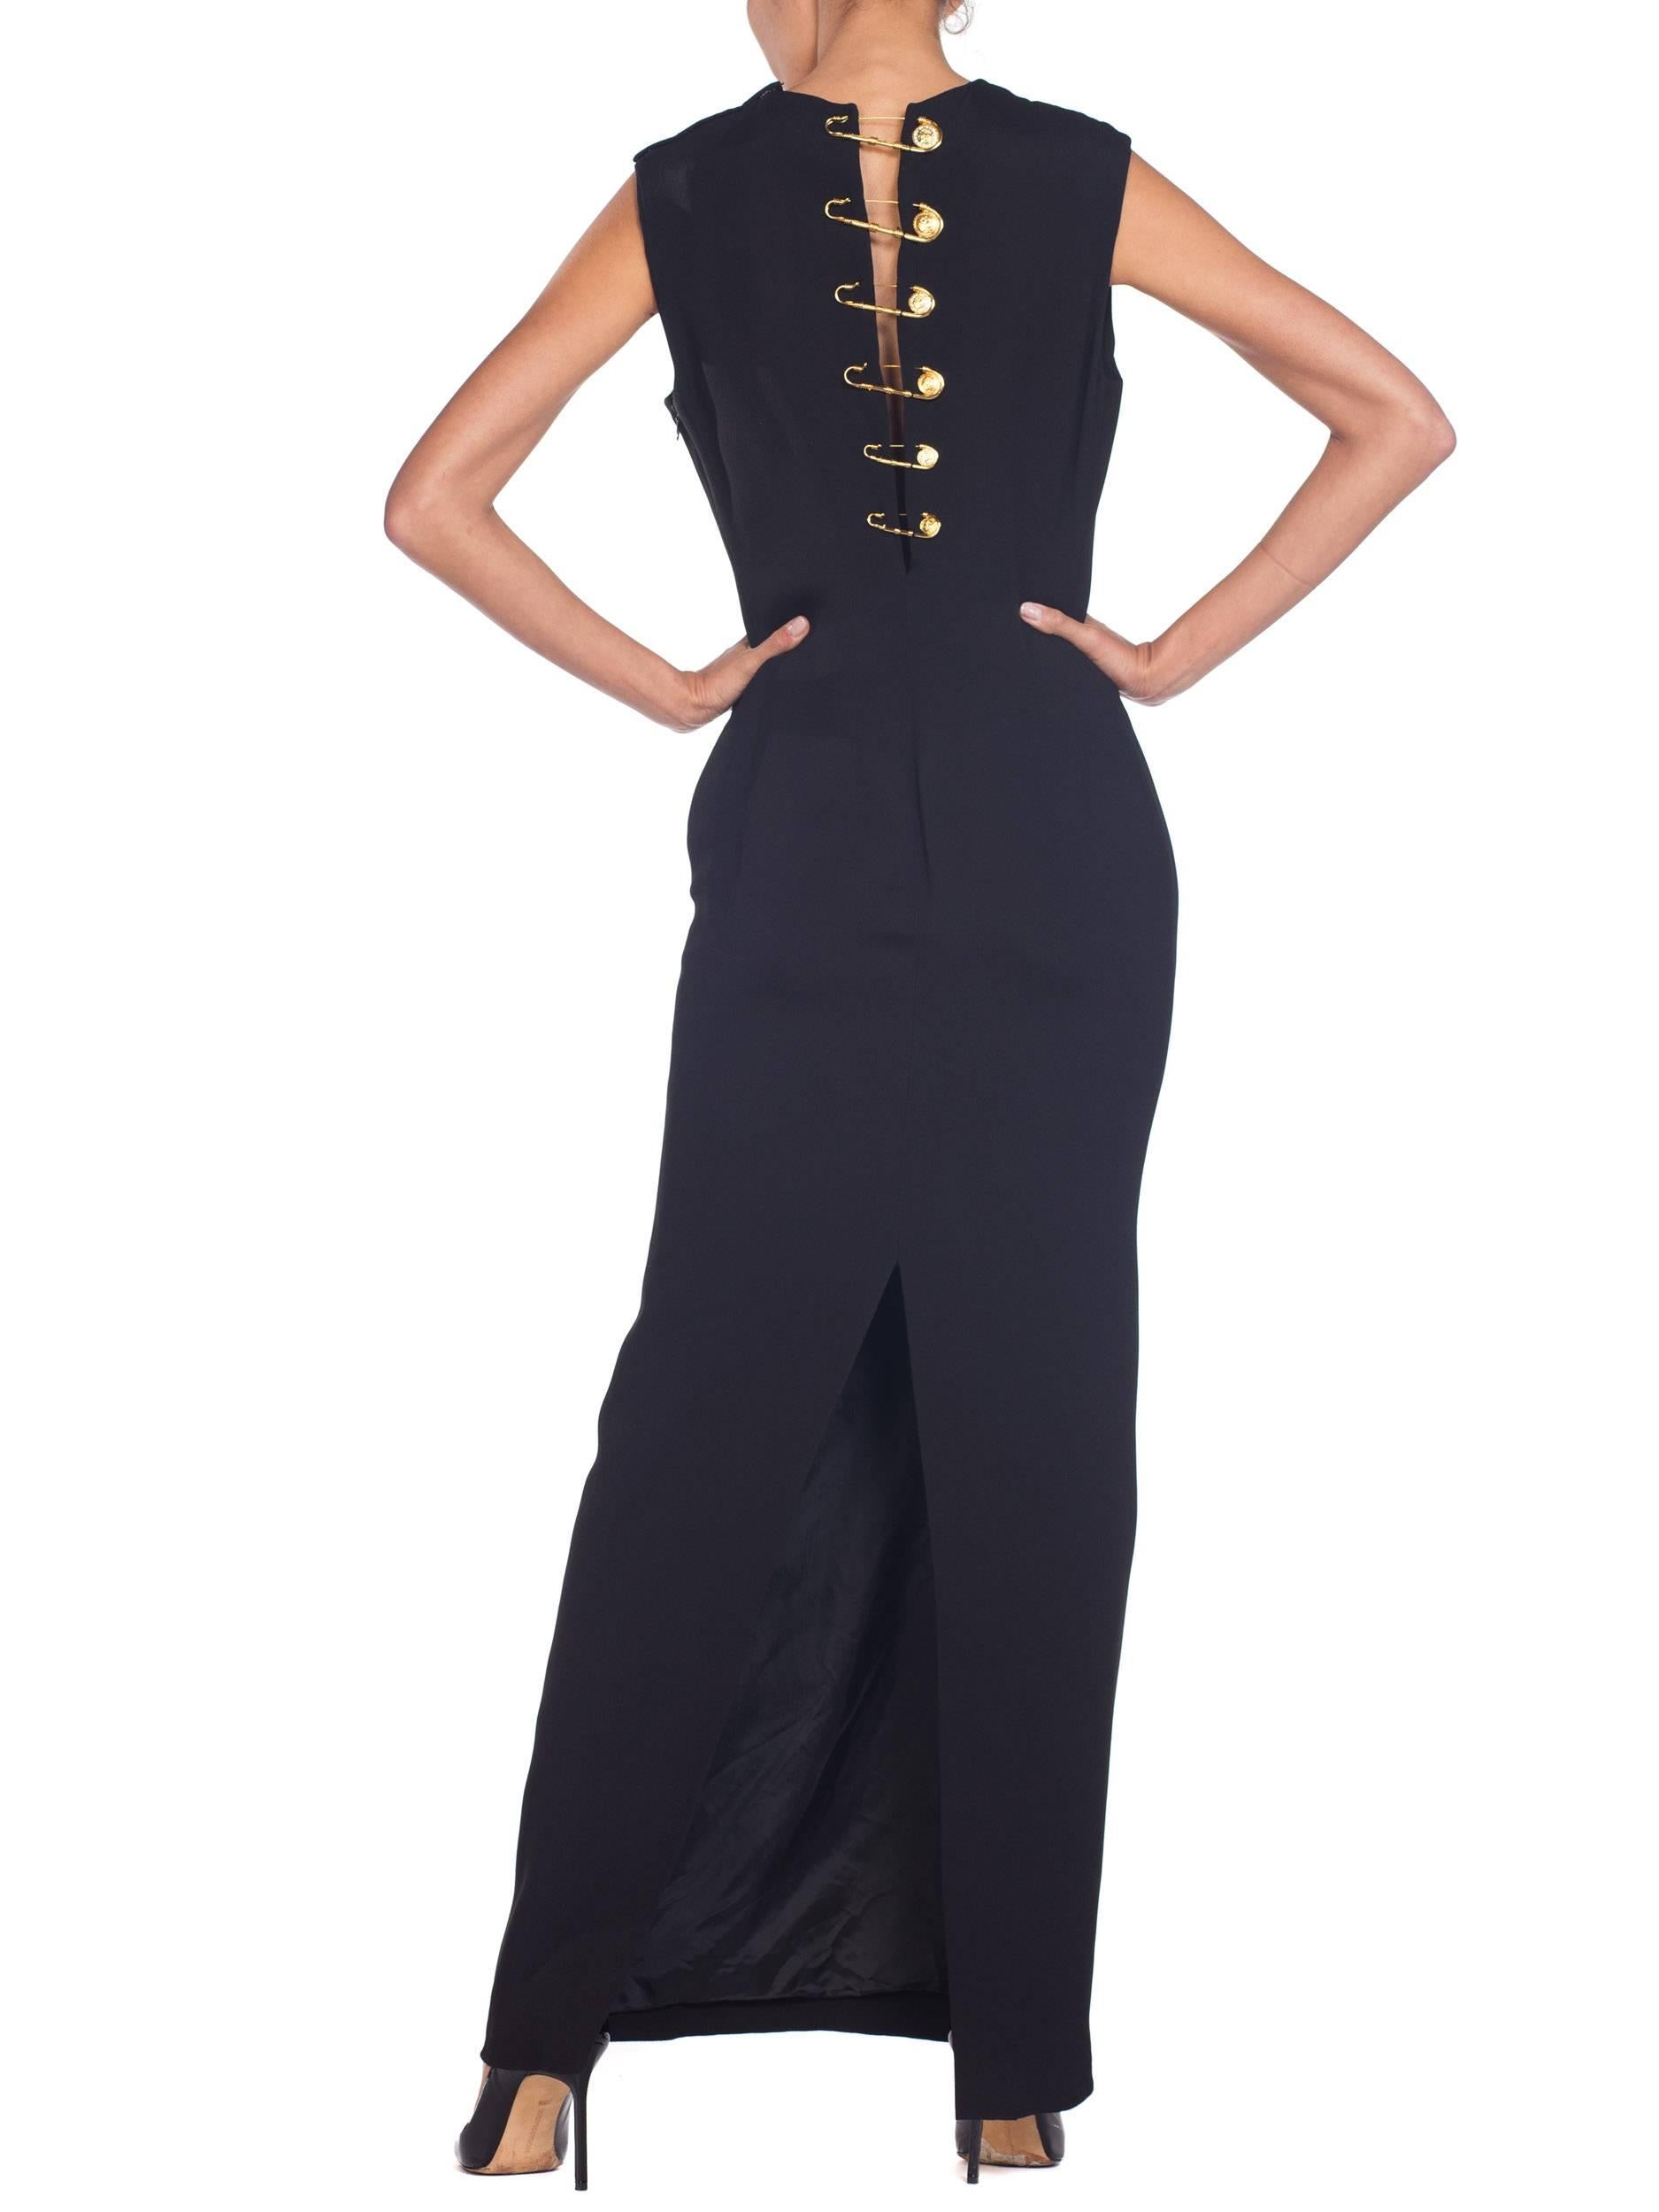 1990S GIANNI VERSACE Black Silk Crepe Gold Safey Pin Gown For Sale 4